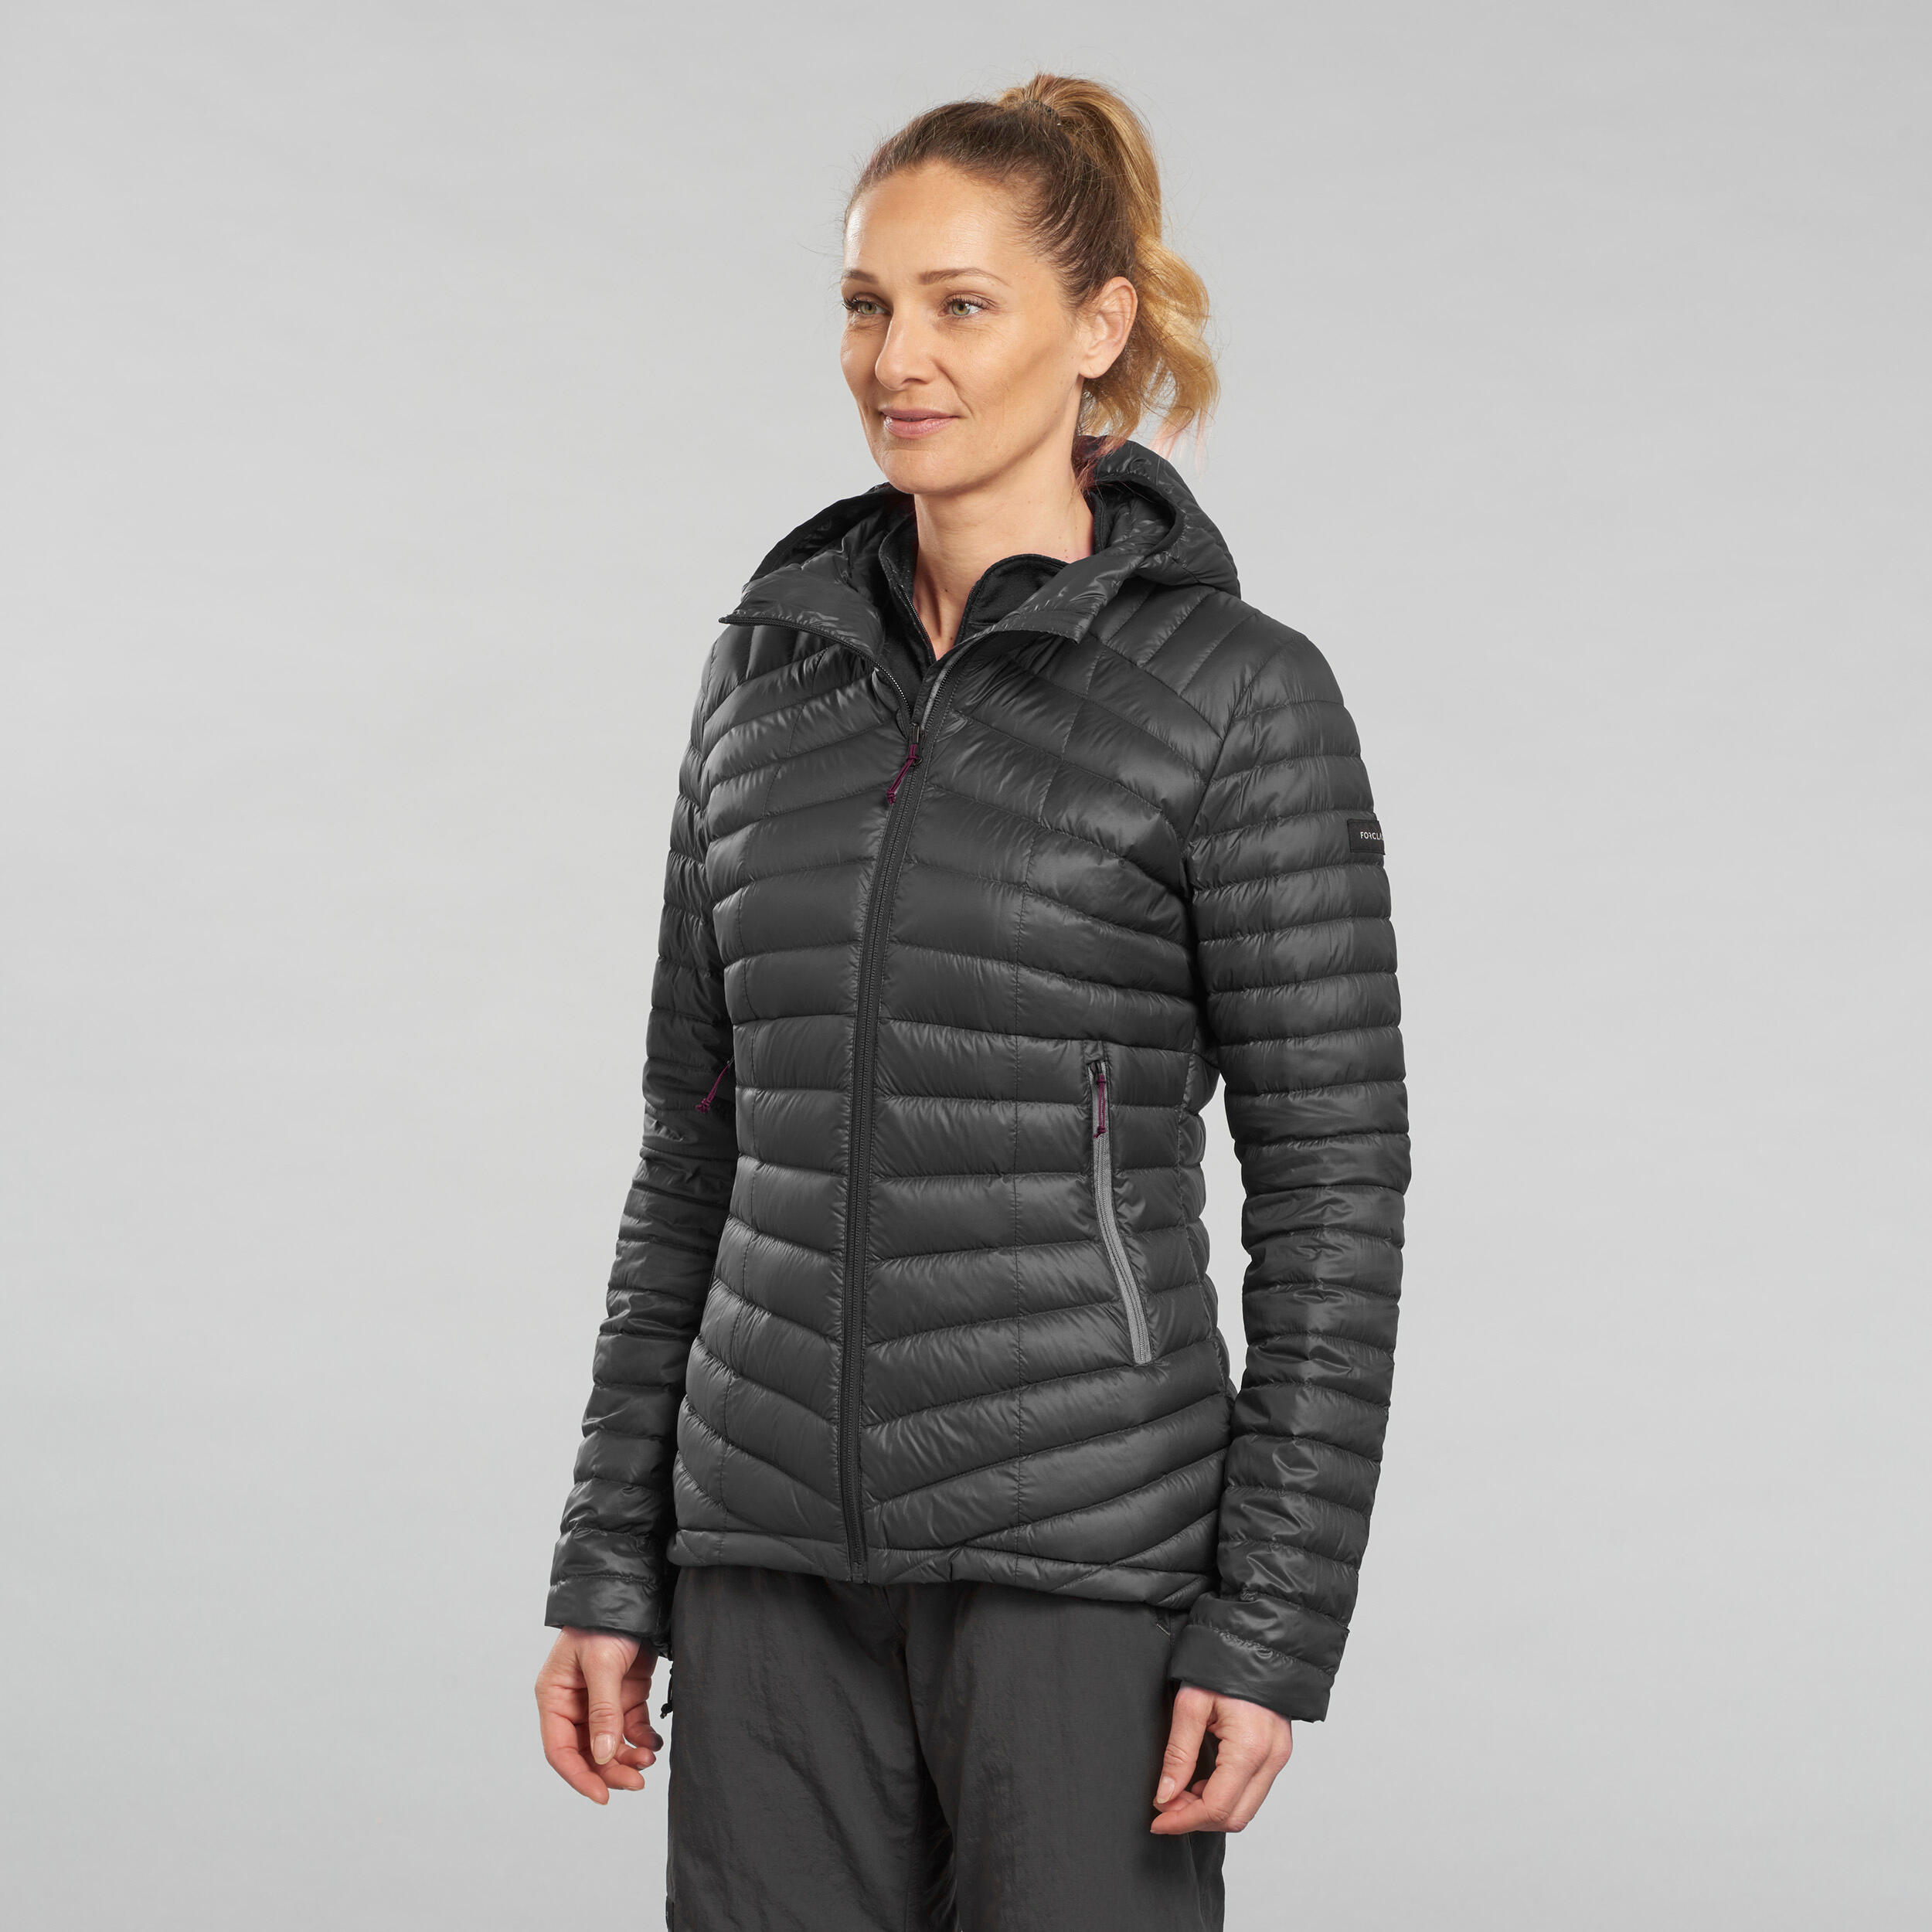 How to Wash and Keep Your Down Jacket in Excellent Condition | Decathlon